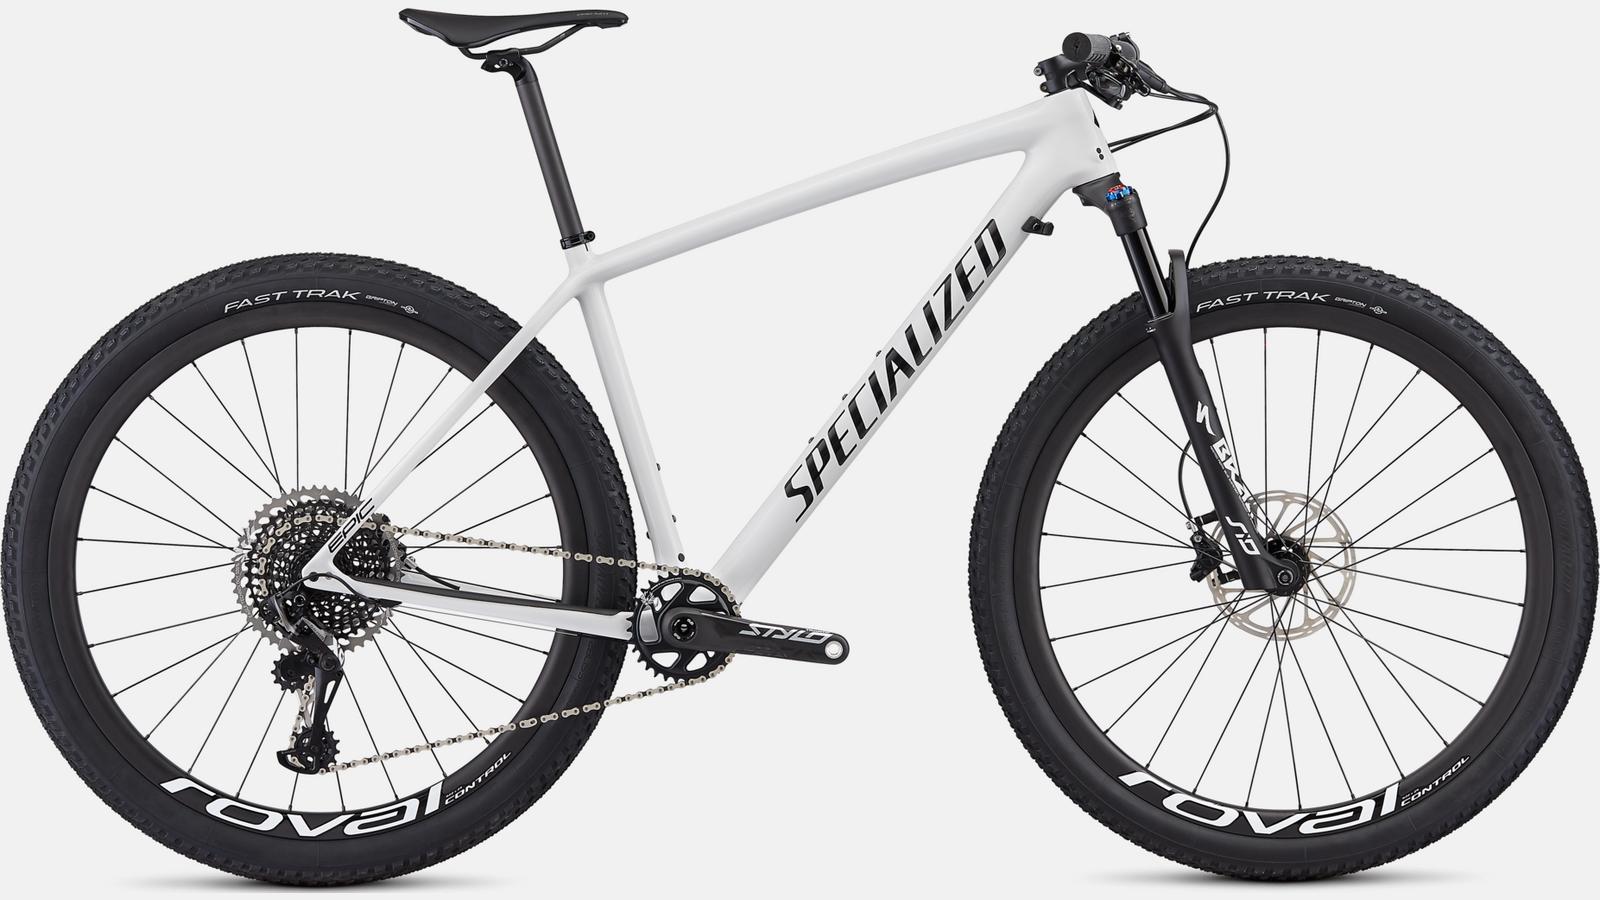 Paint for 2019 Specialized Epic Hardtail Pro - Gloss White